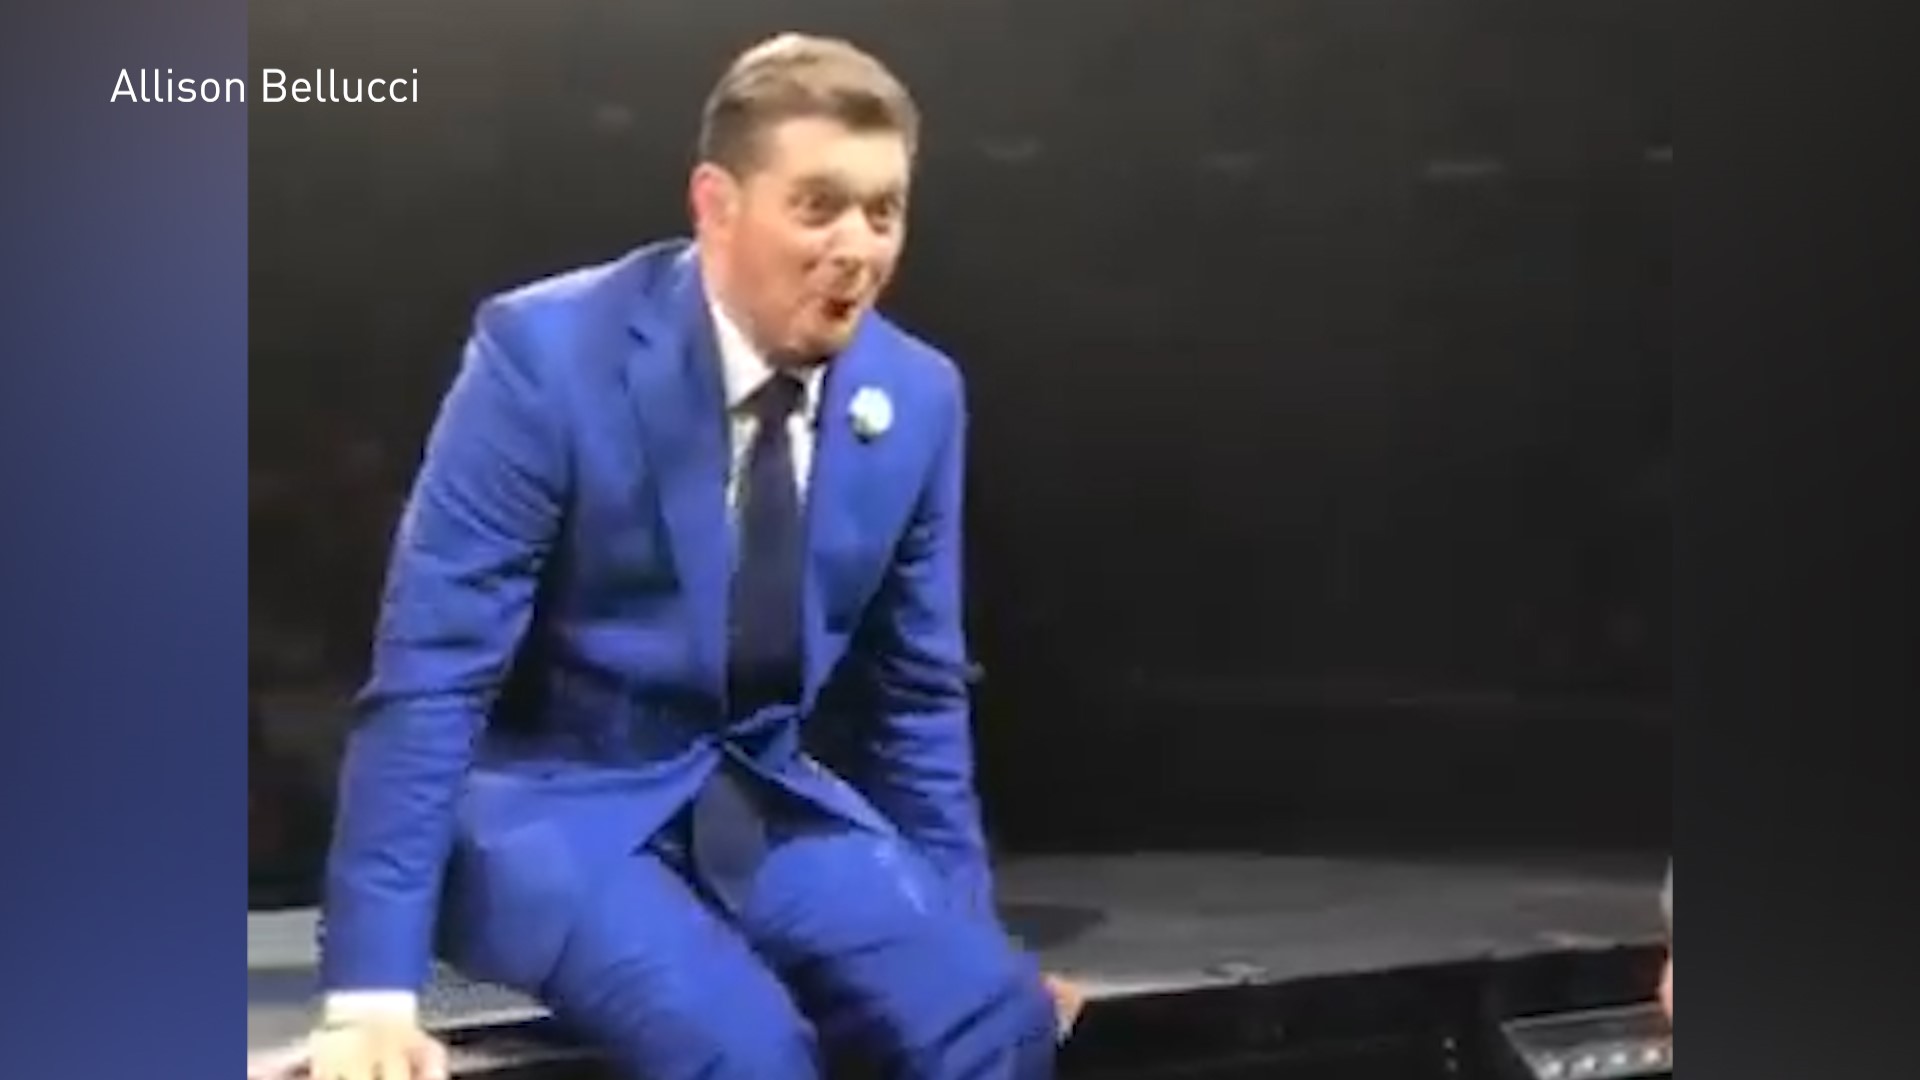 When Michael Bublé asked this fan to sing during his show at Madison Square Garden, she stunned everyone.